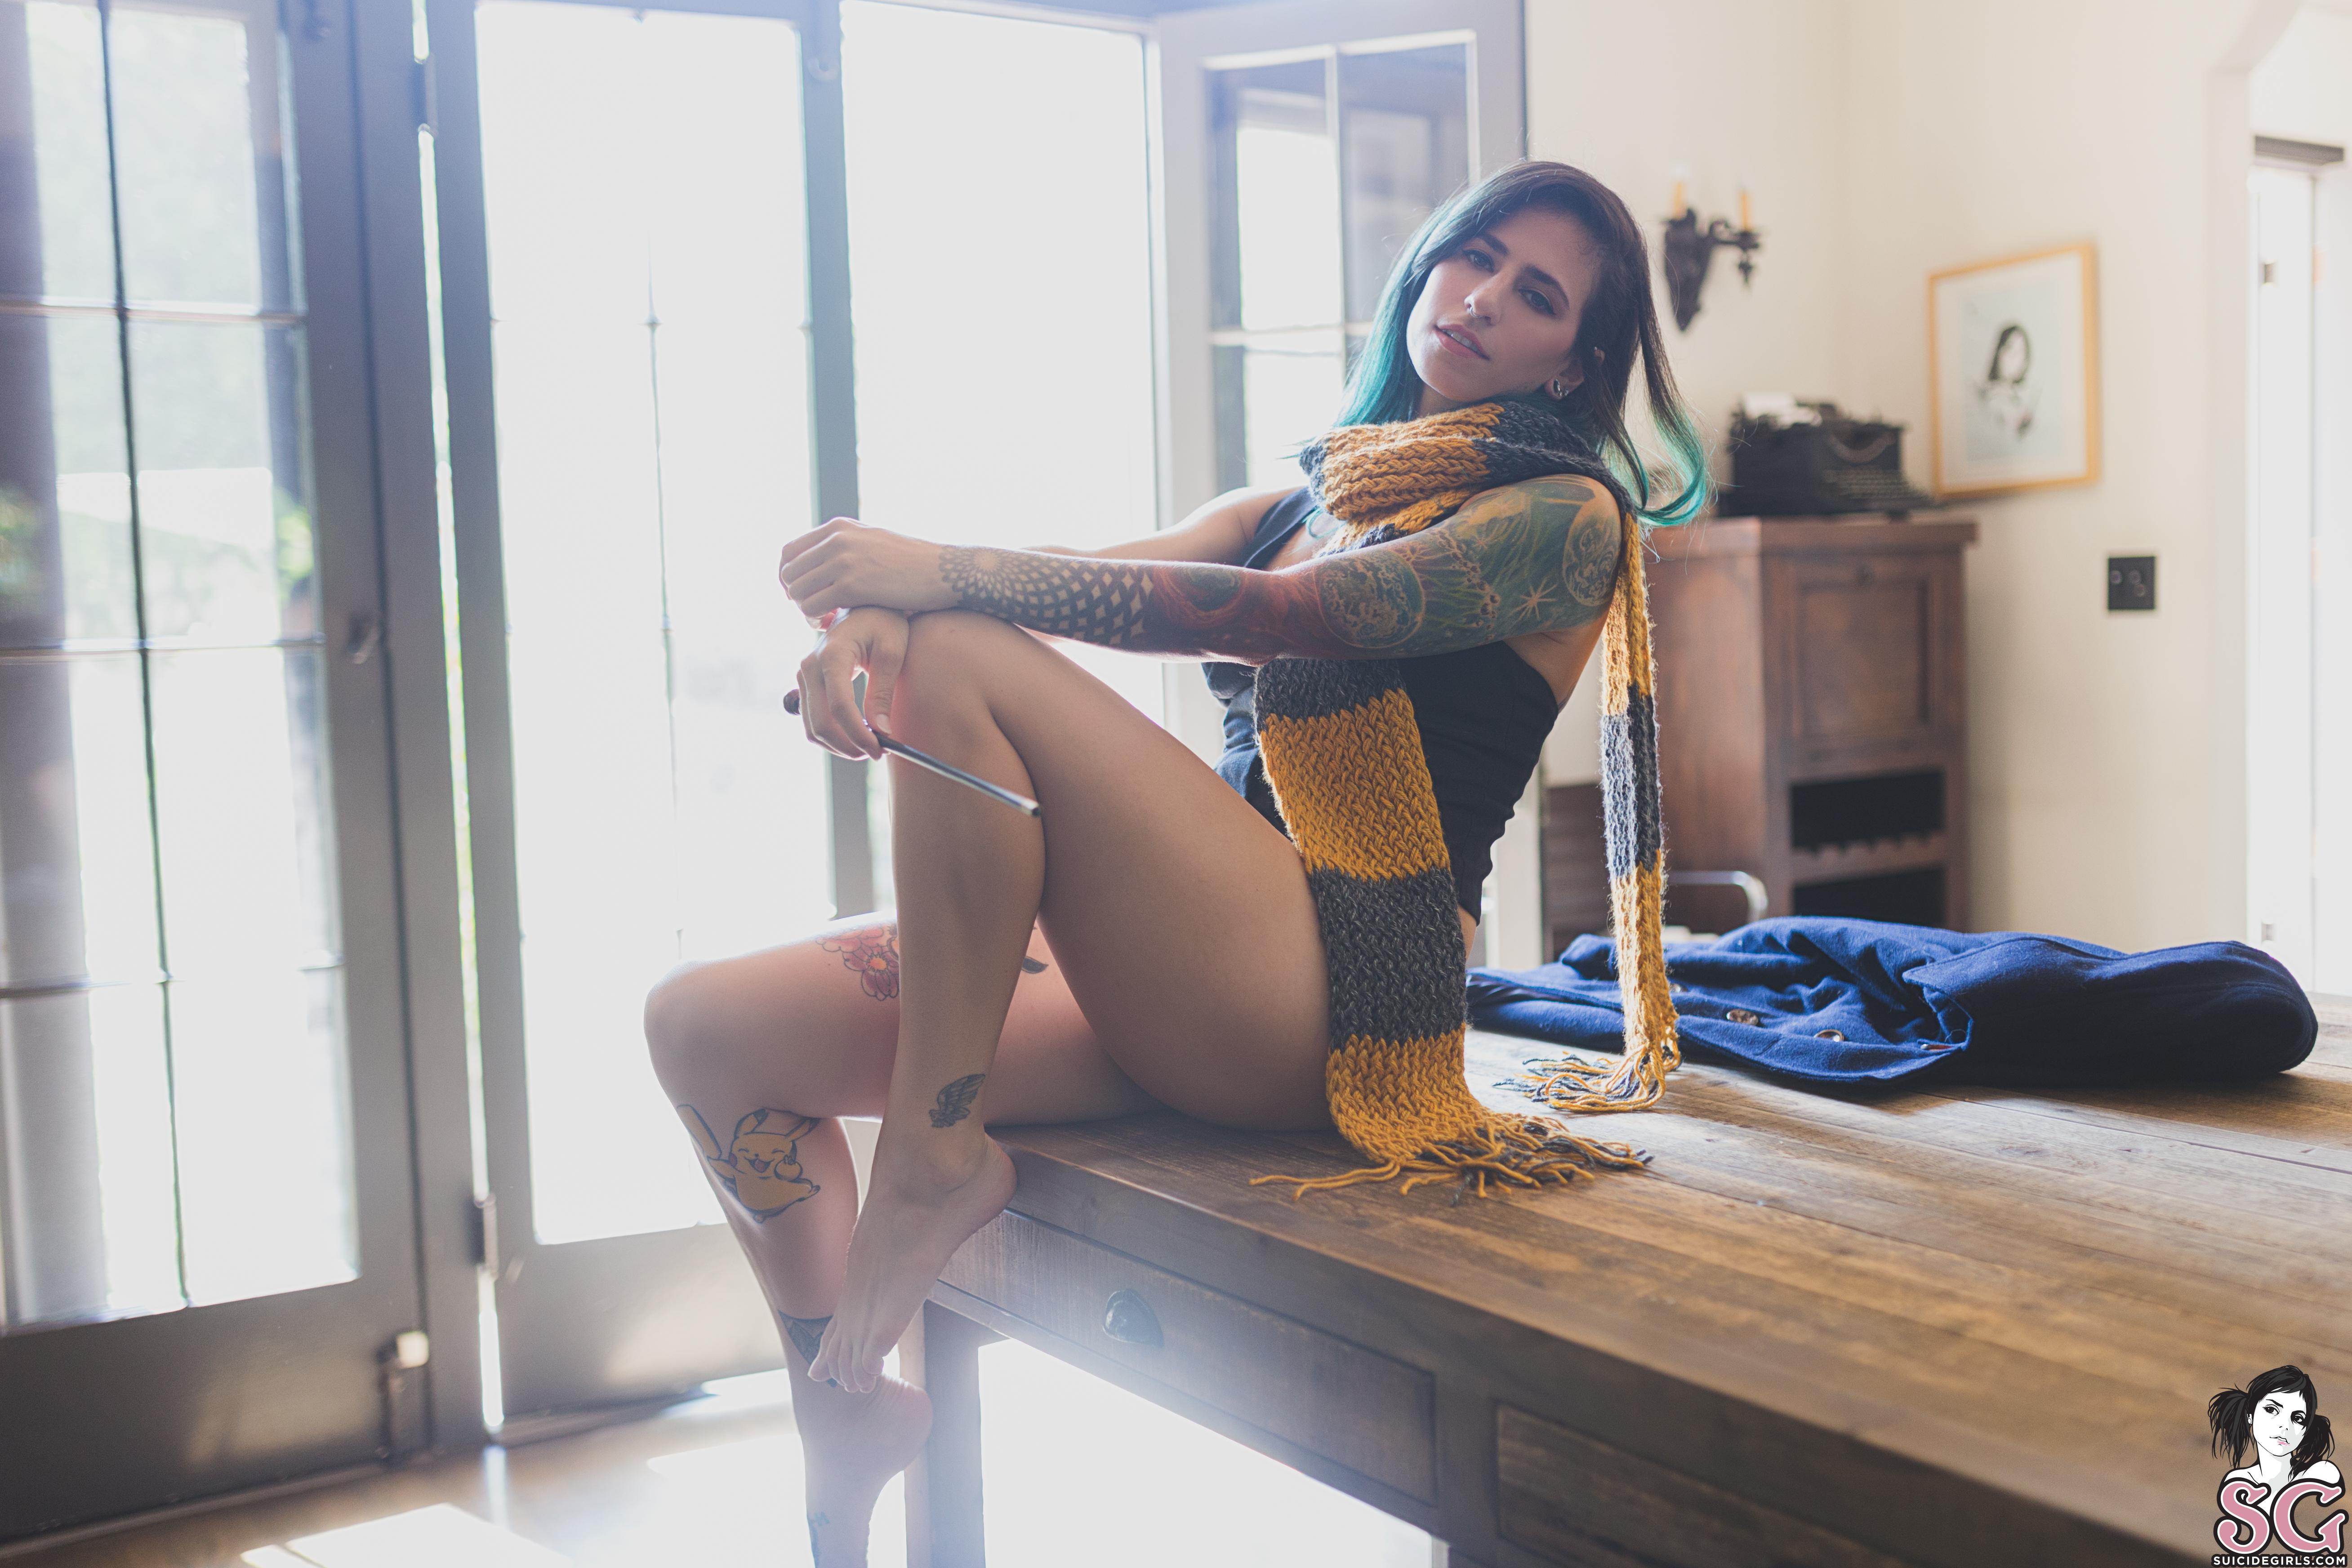 People 5232x3488 Nebula Suicide Suicide Girls tattoo dyed hair scarf Pikachu sitting women